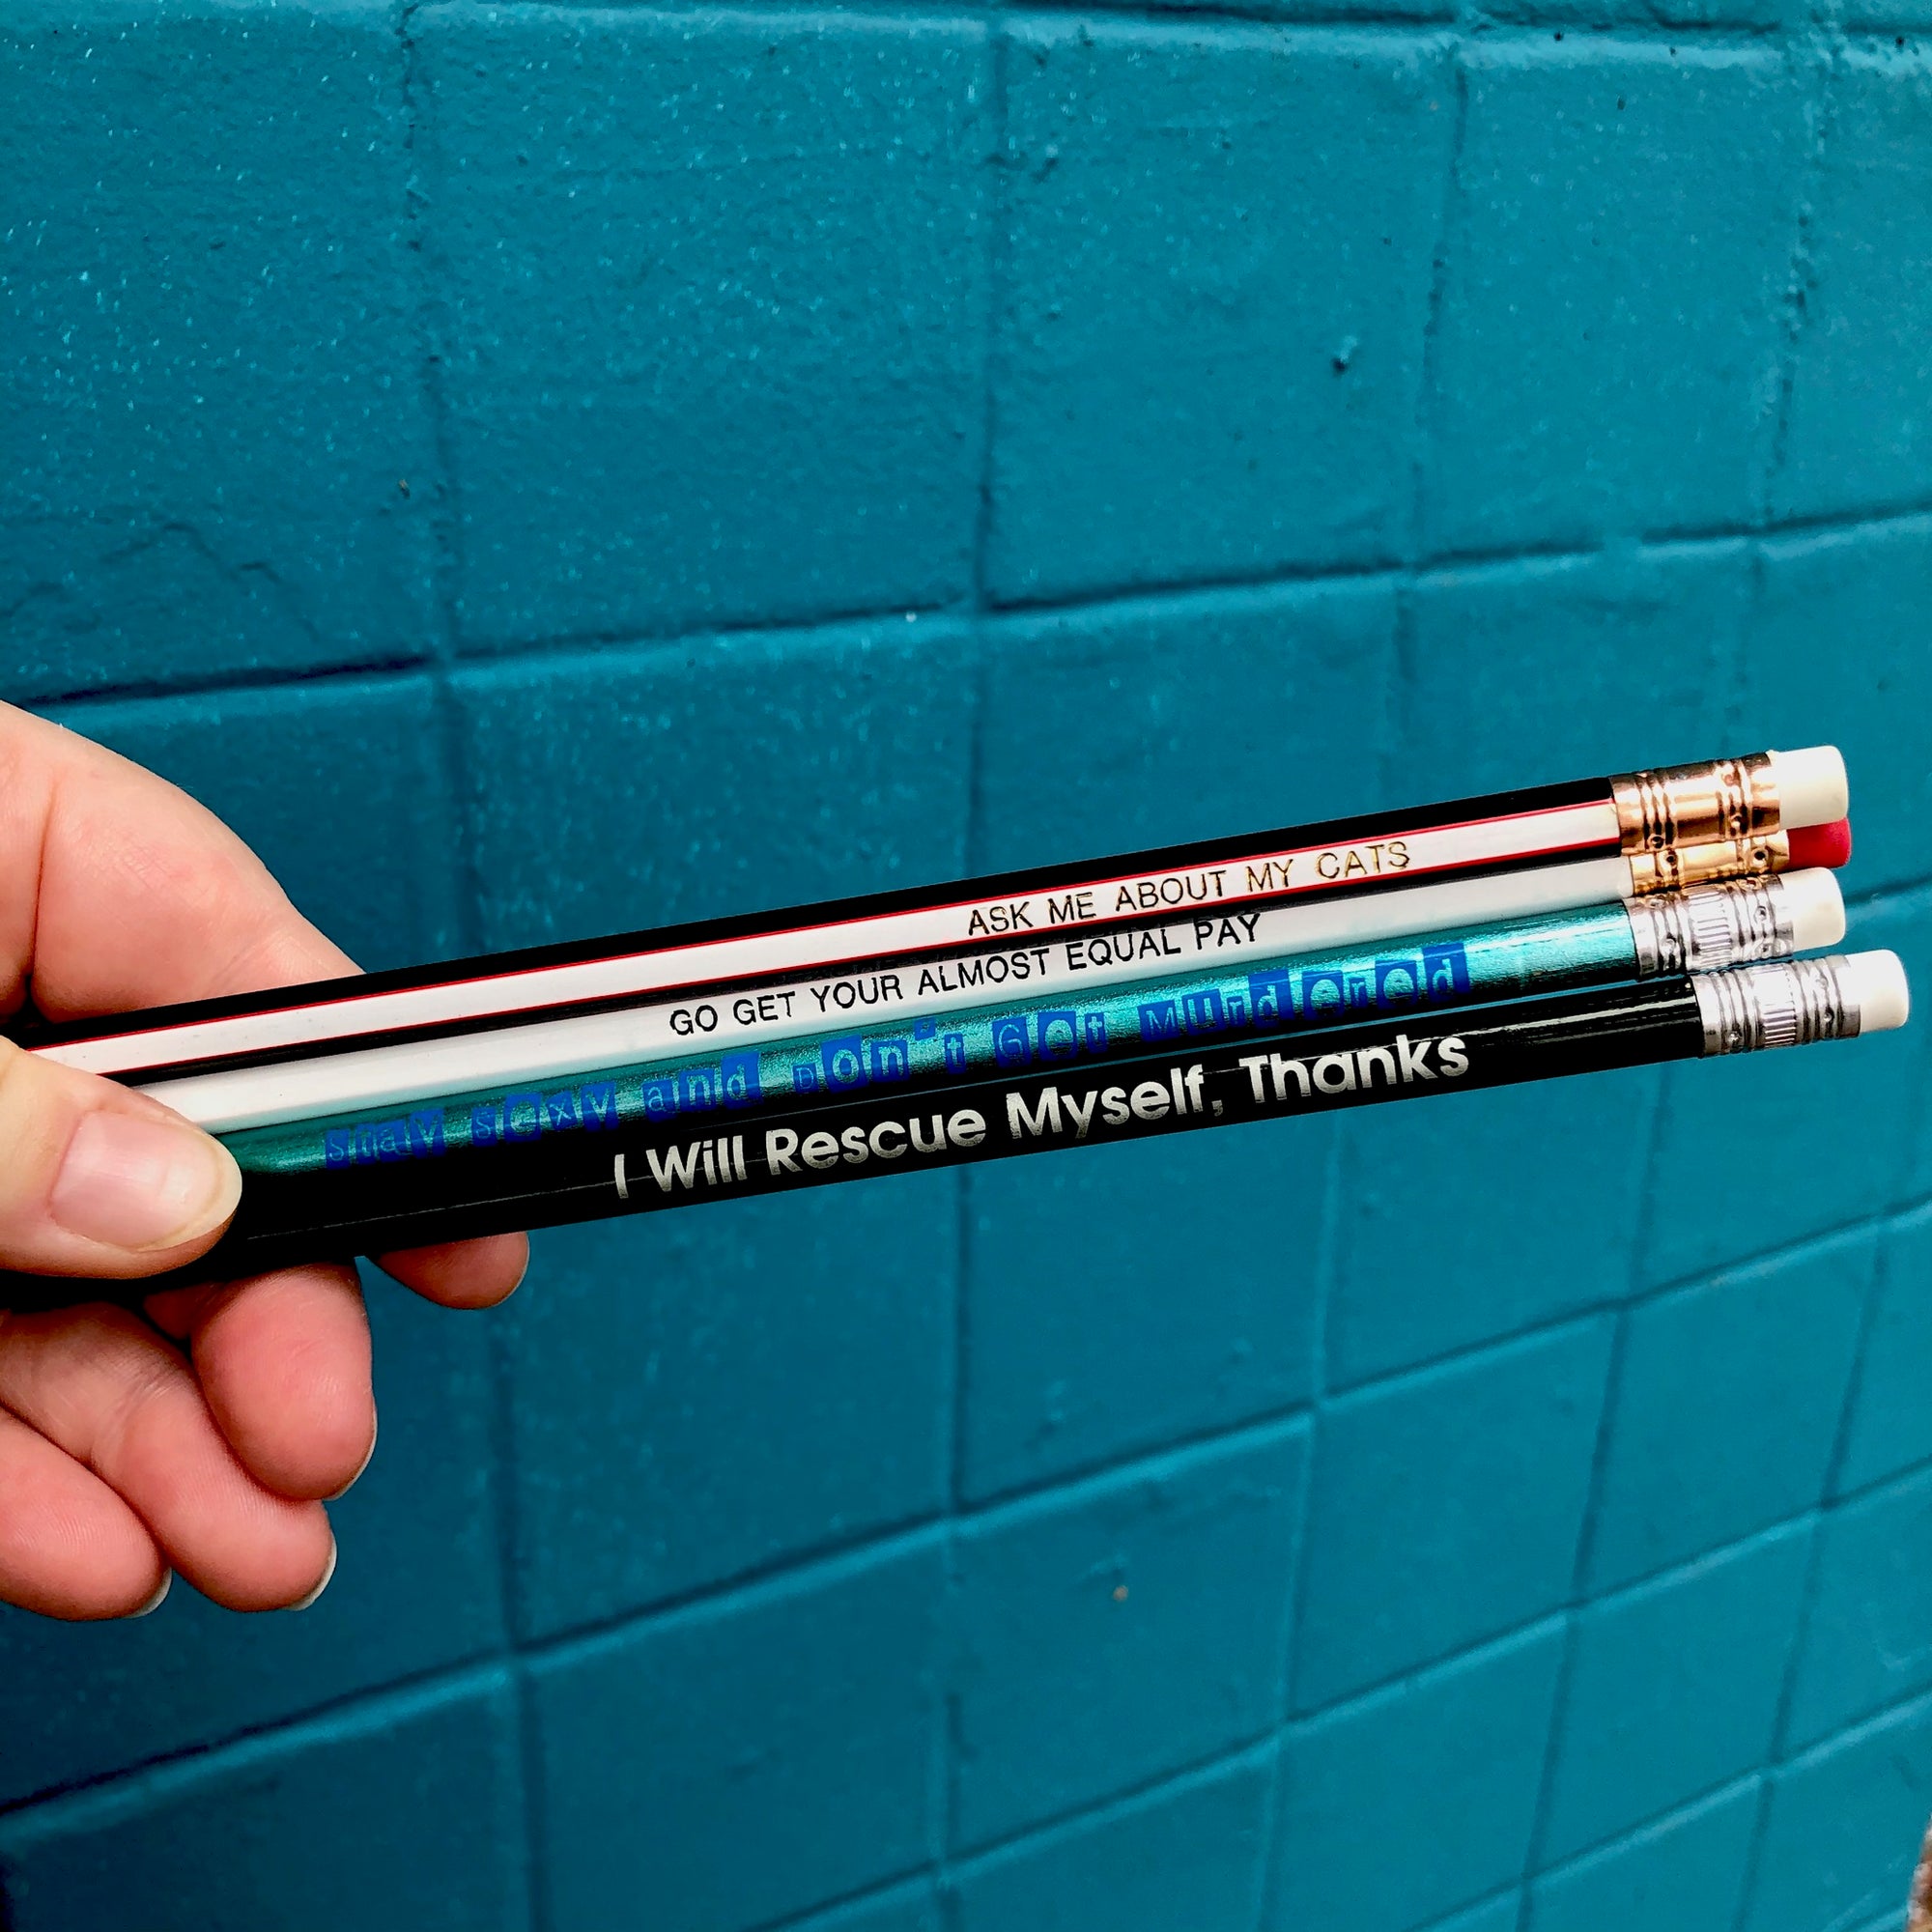 Pencil Three Pack - Follow Your Bliss or Else